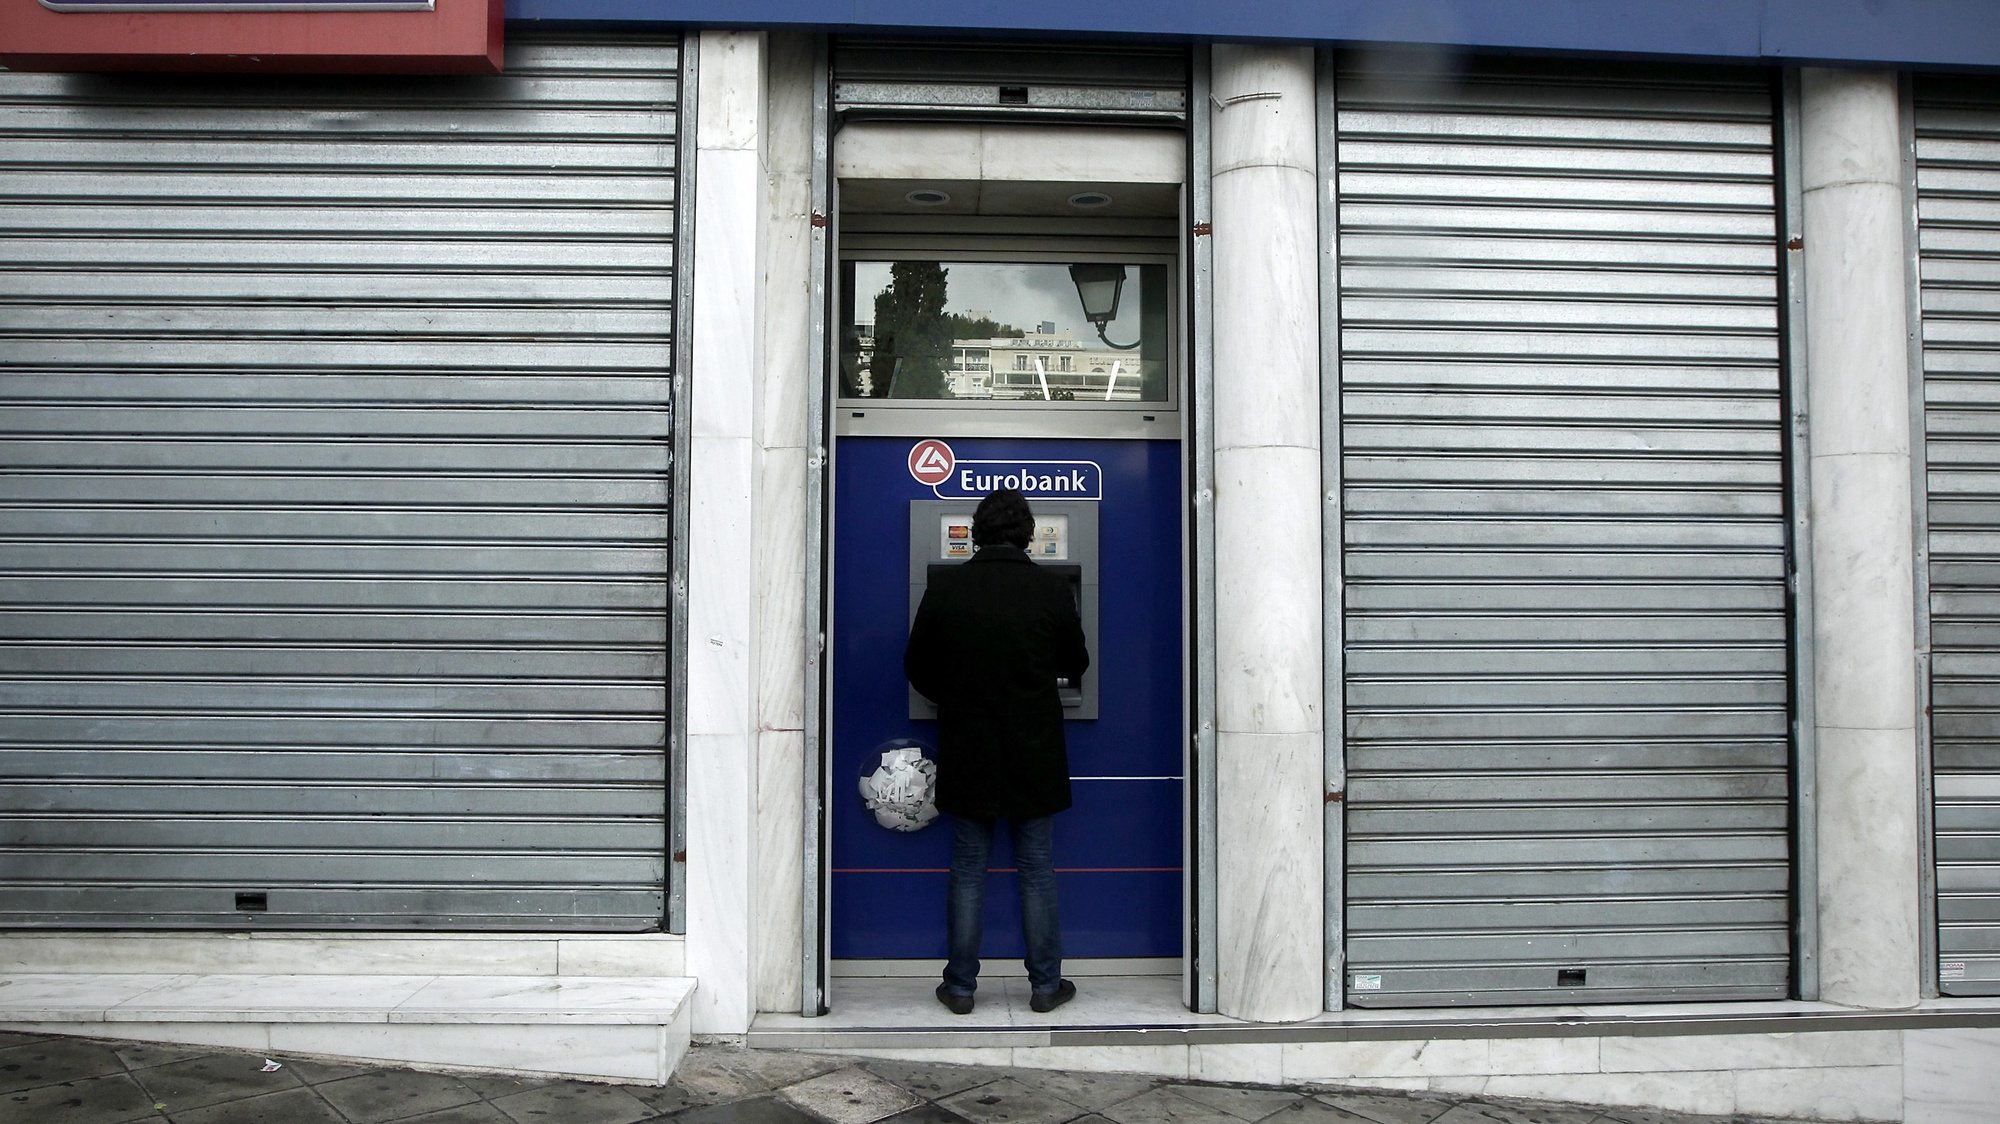 epa03526006 A man uses an ATM of a closed branch of Eurobank in central Athens, Greece, 06 January 2013. The head of the European Investment Bank (EIB) said it would take Greece decades to recover from its financial crisis and criticized the efforts of European politicians.  EPA/ALKIS KONSTANTINIDIS